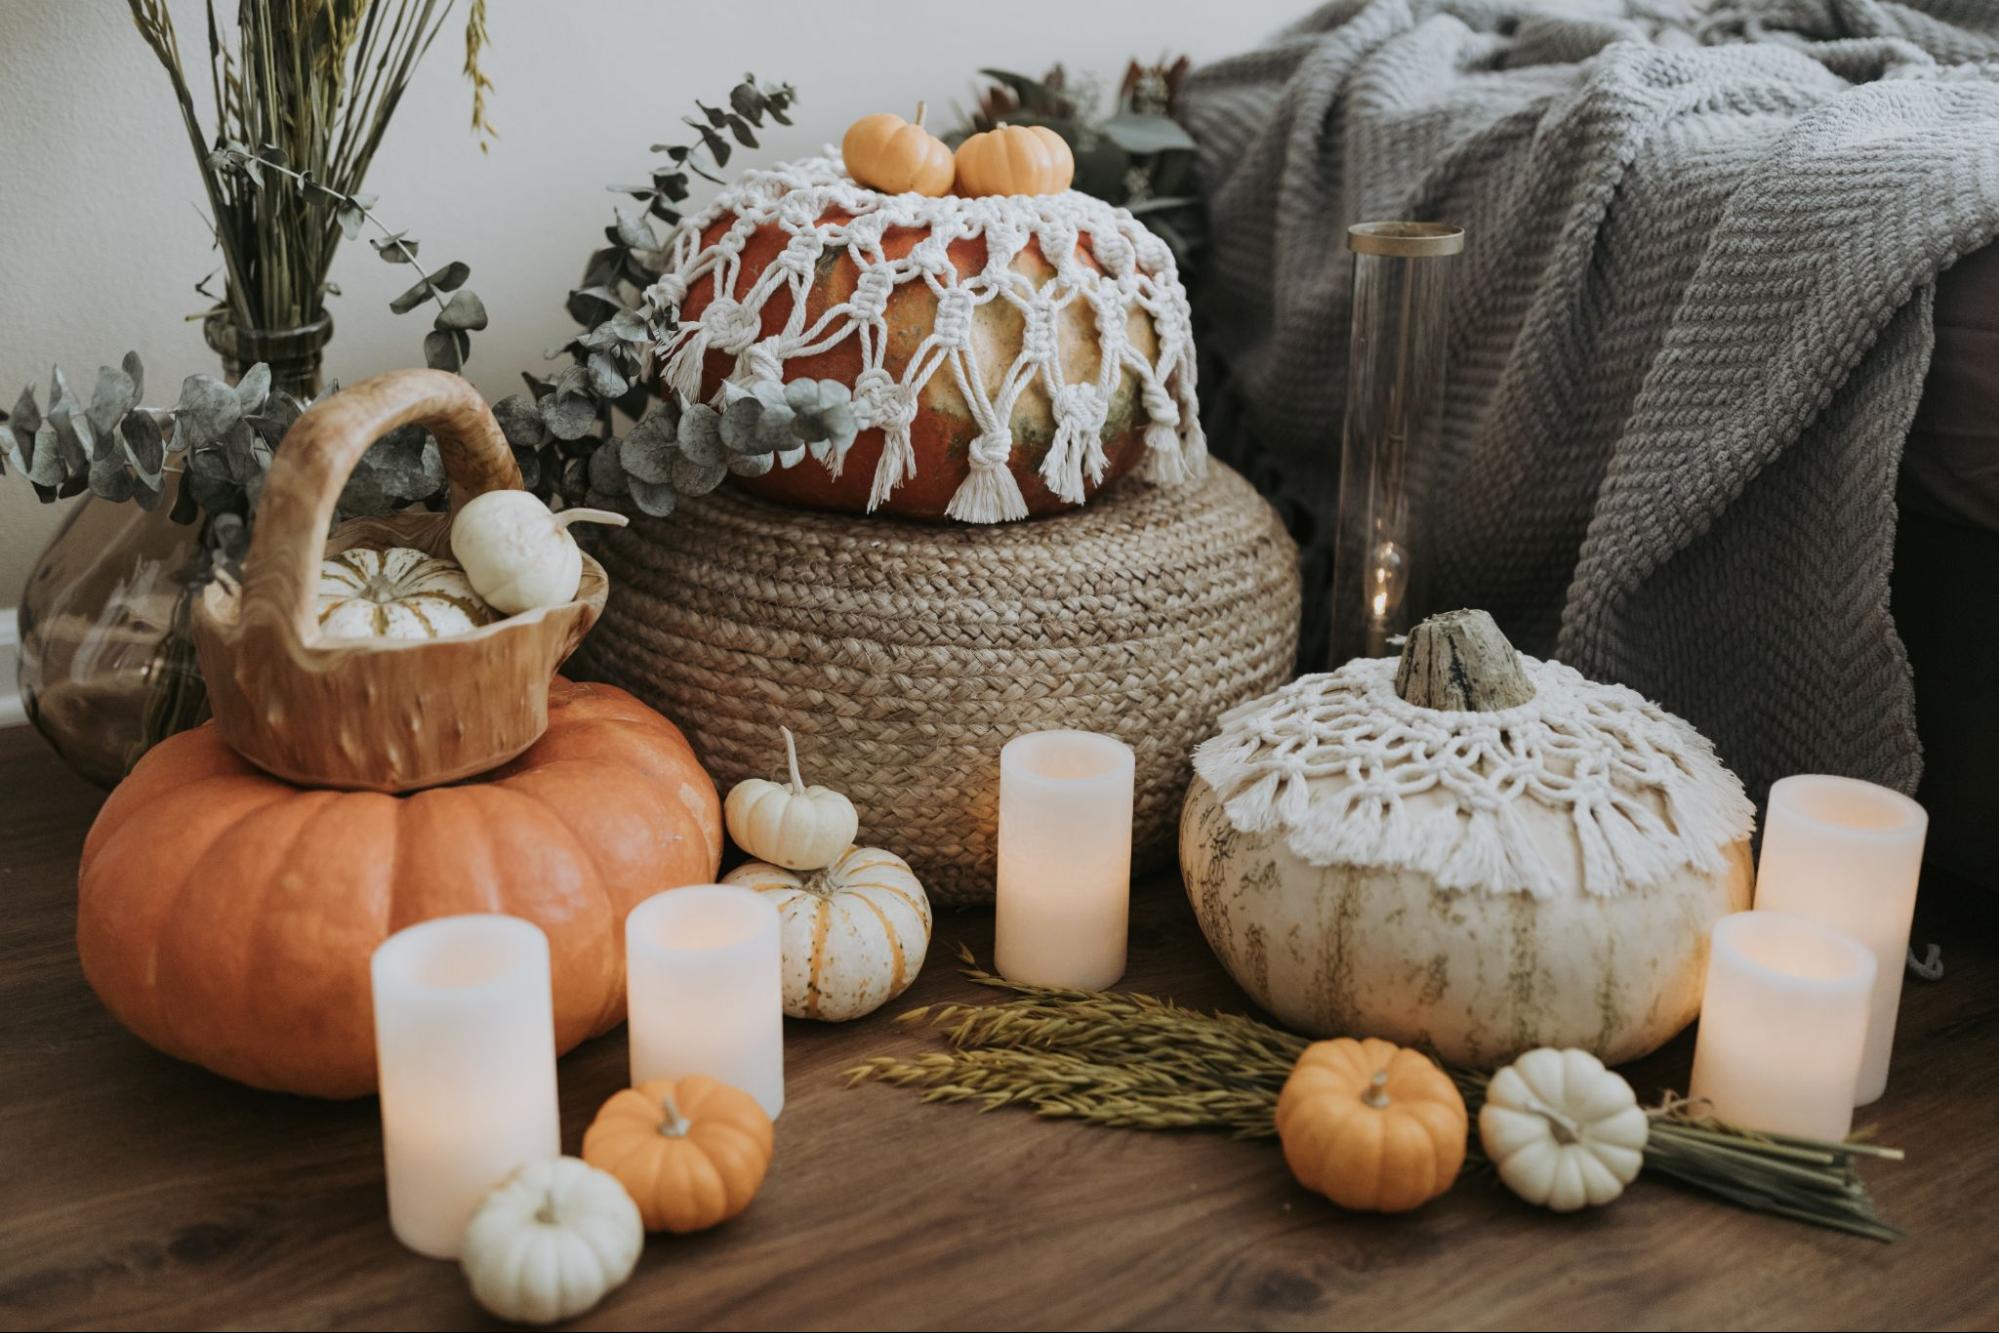 A beautiful fall display featuring candles, macrame, and pumpkins.